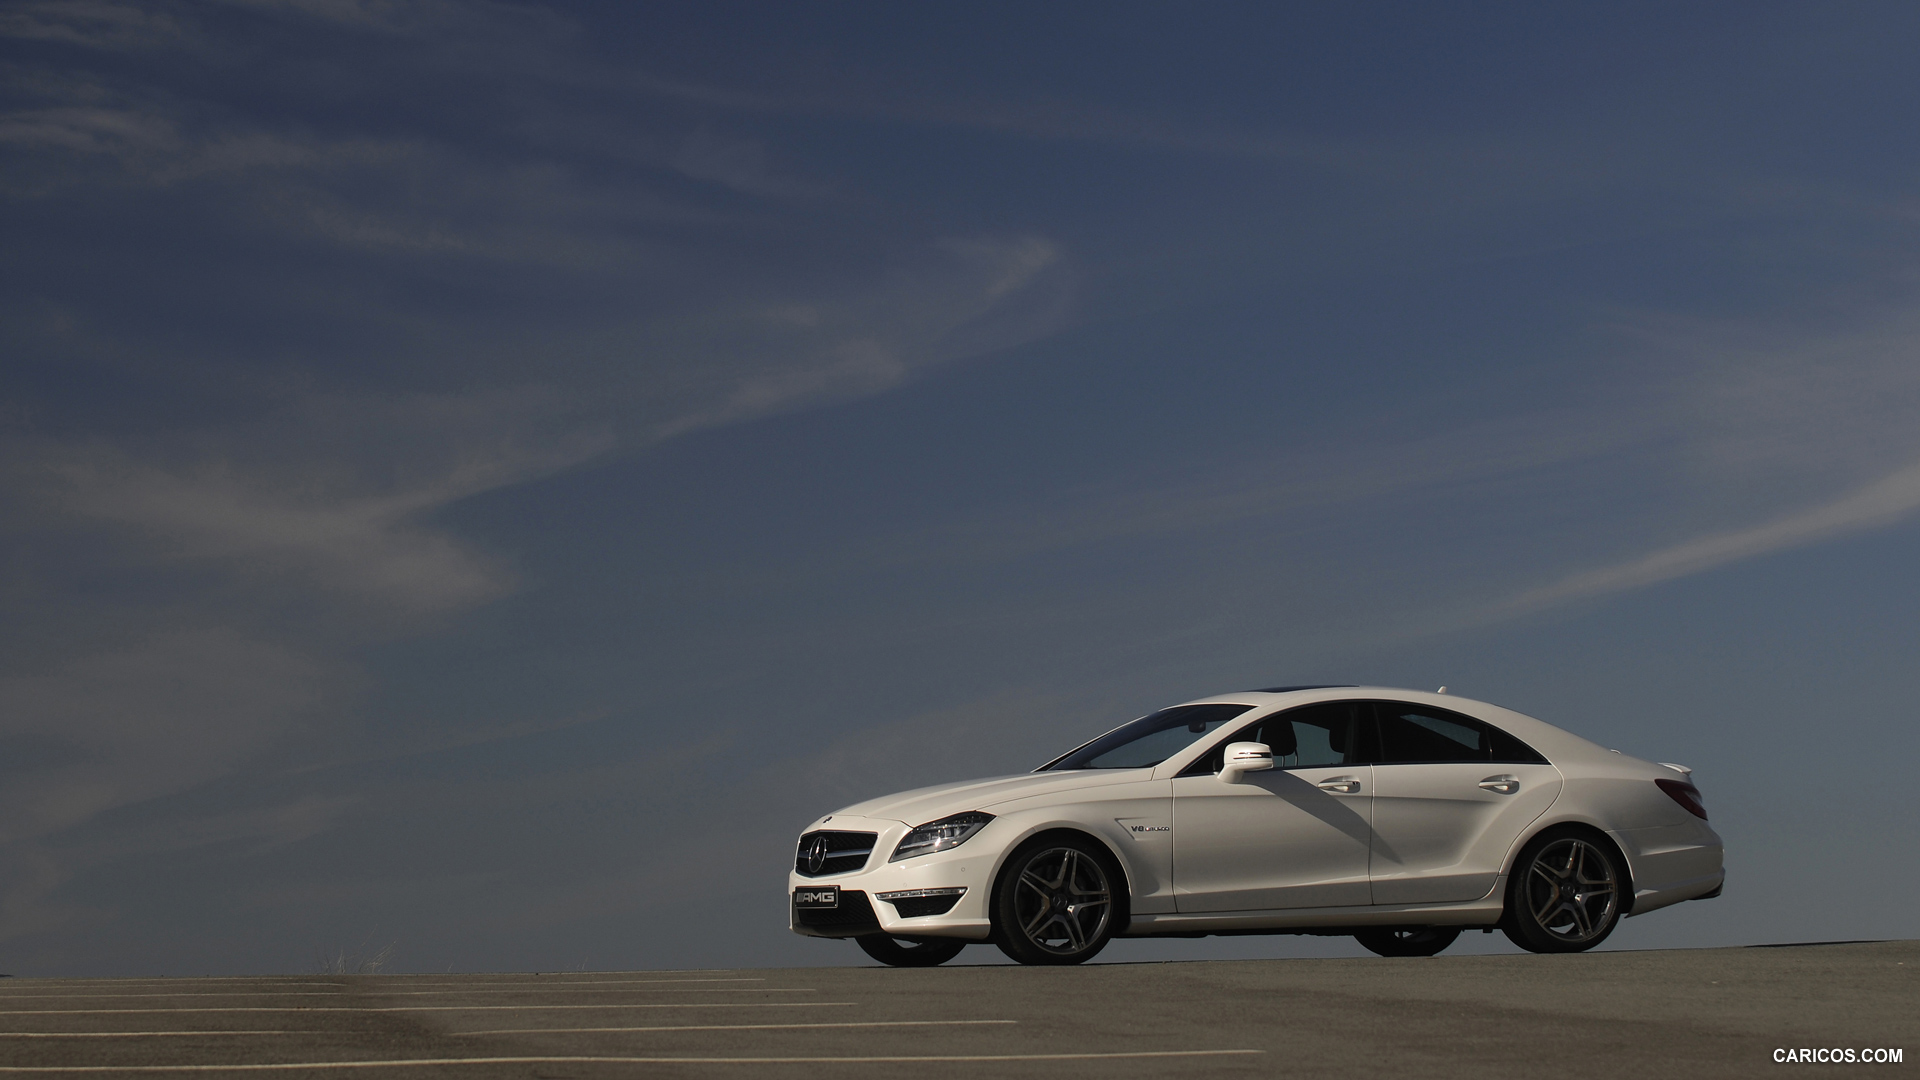 Mercedes-Benz CLS63 AMG (2012) US-Version - Diamond White - Side, #22 of 100